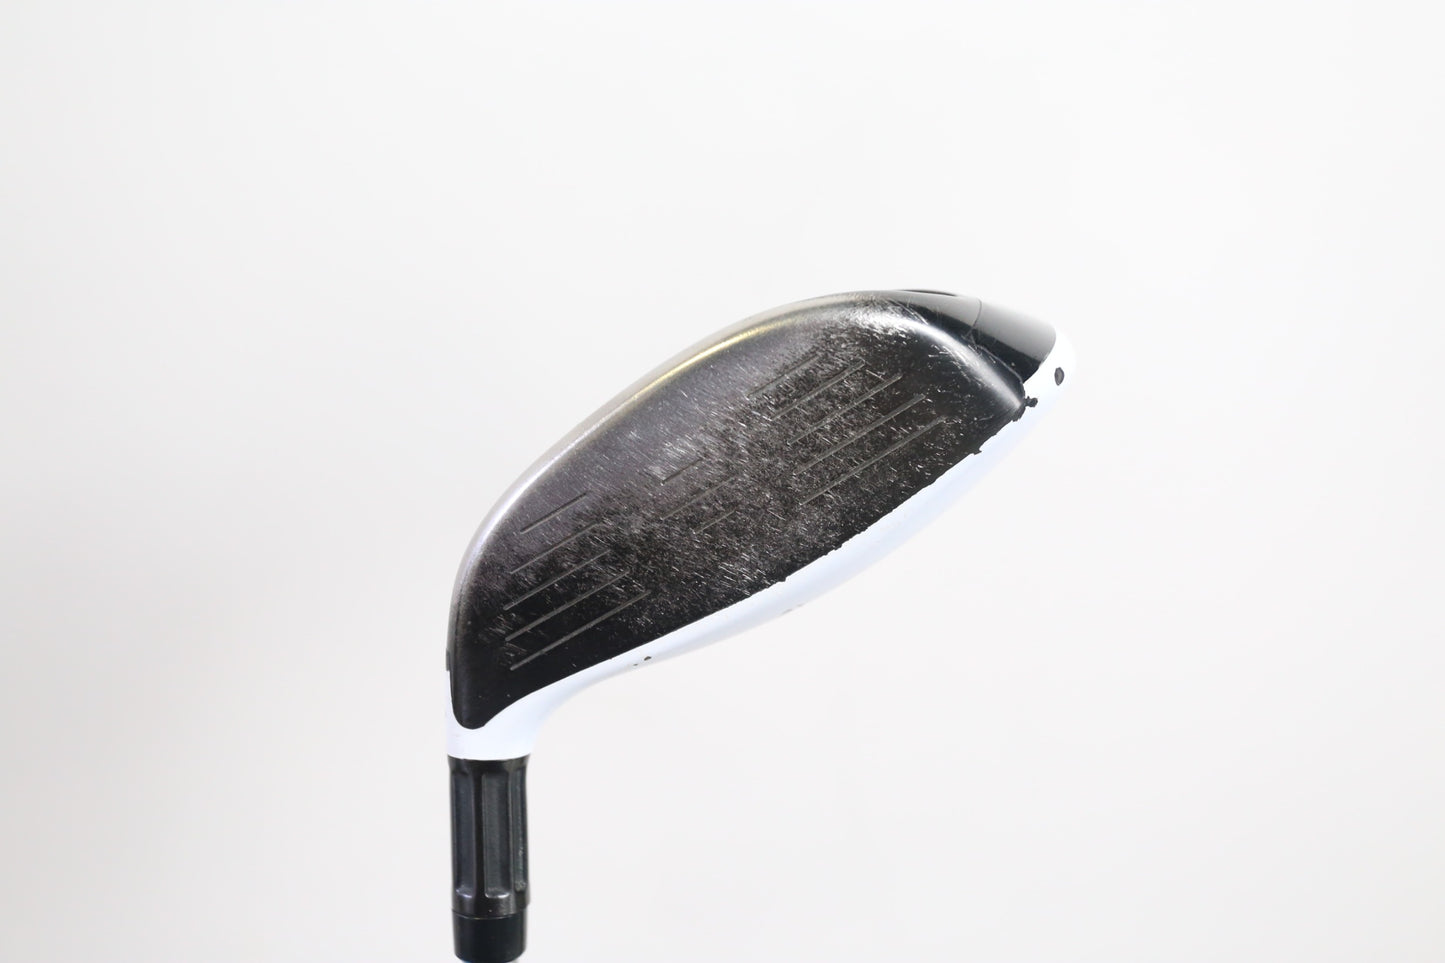 Used TaylorMade M2 3-Wood - Right-Handed - 16.5 Degrees - Ladies Flex